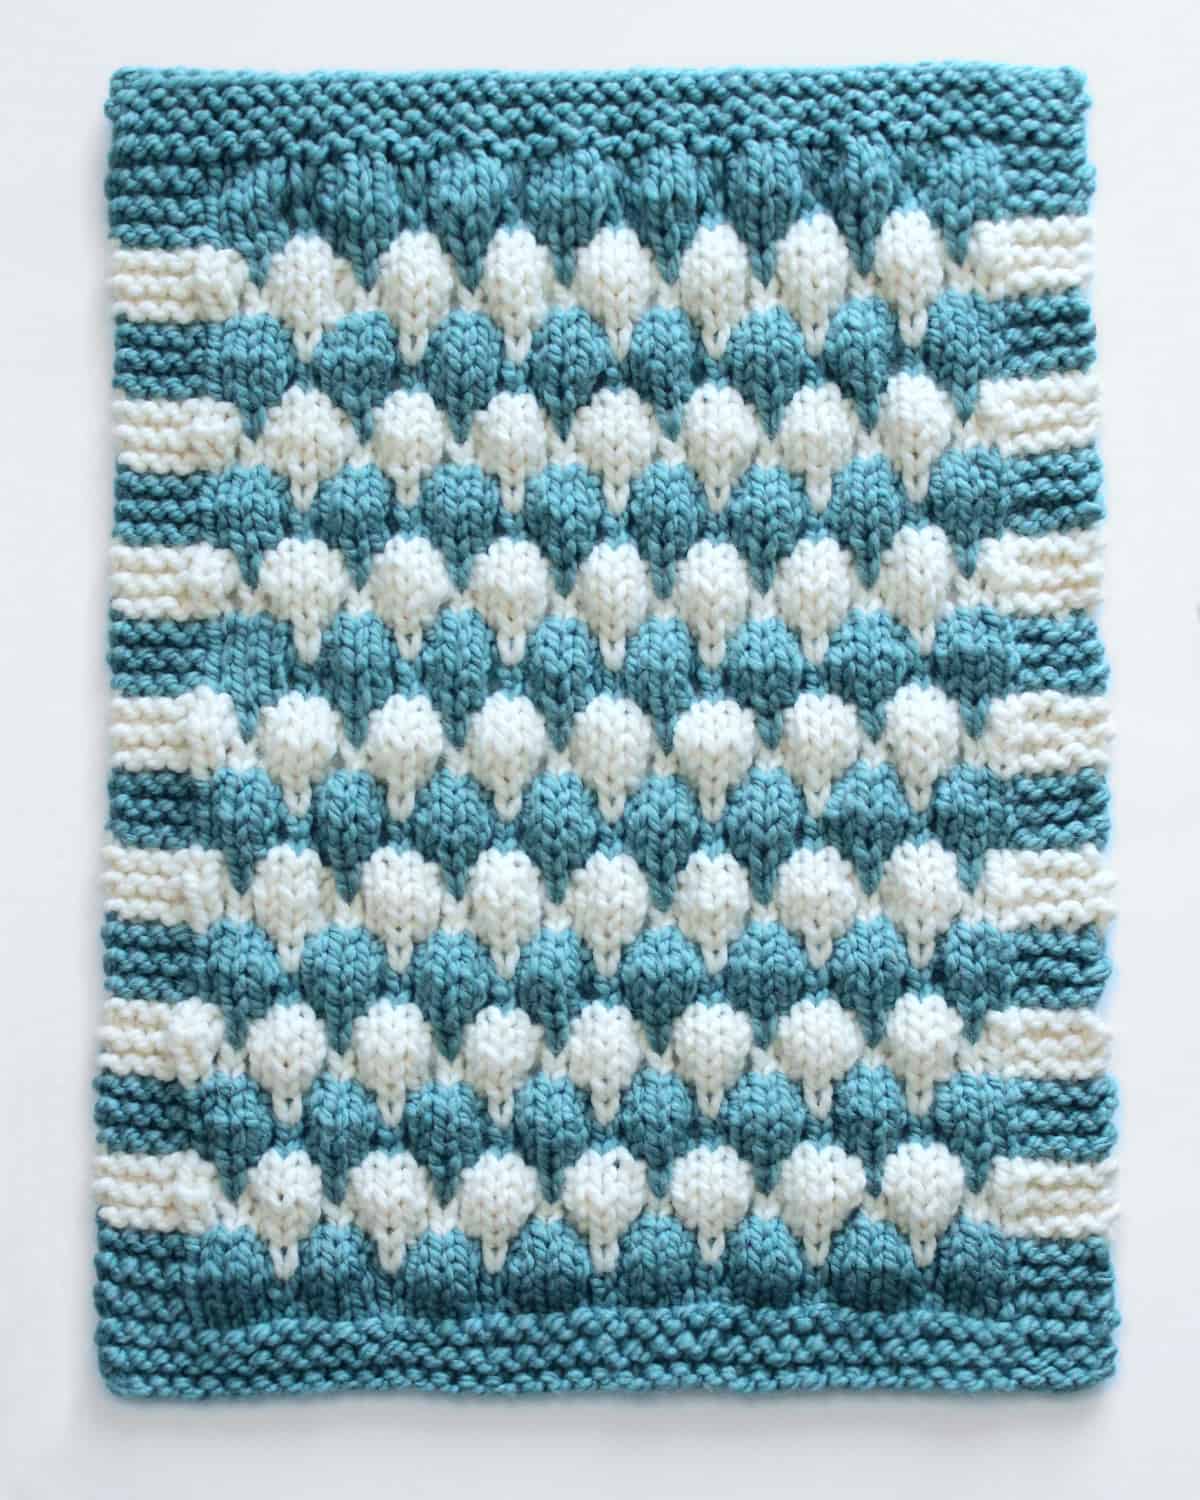 Knitted Chunky Blanket in Baby Stroller size with blue and white yarn colors.